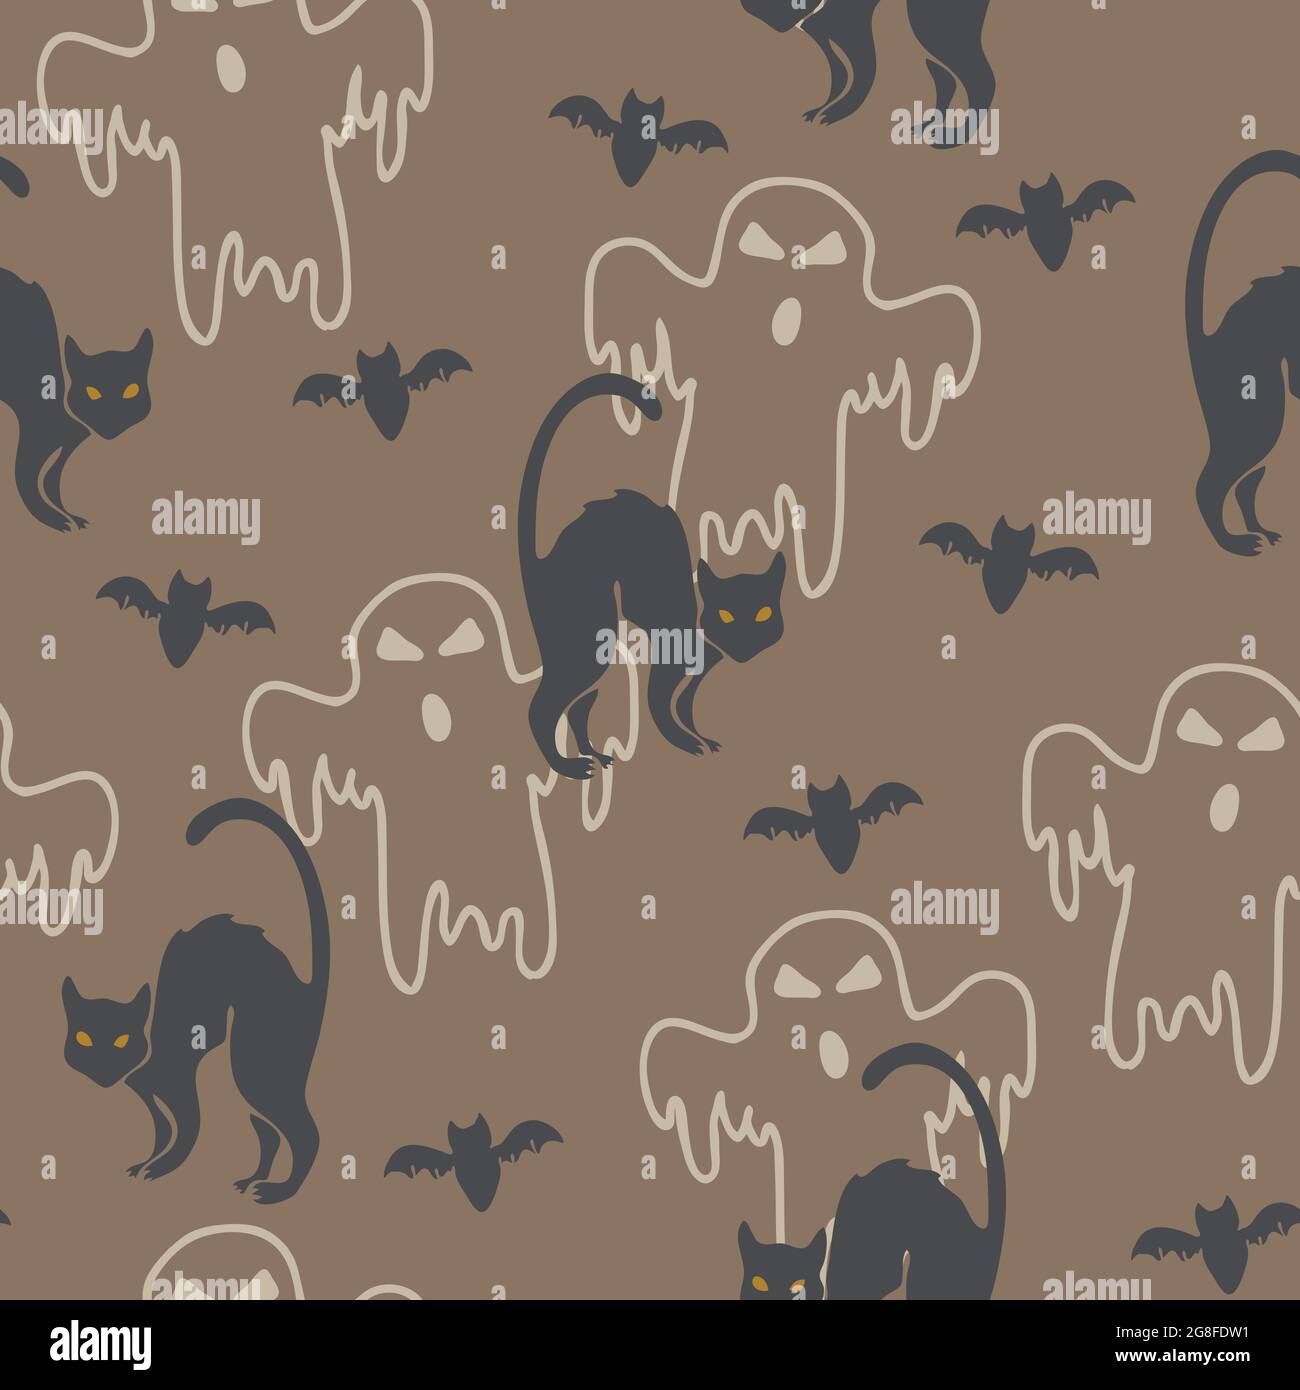 Scary Cat on Halloween Wallpaper with Carved Pumpkins Stock Vector   Illustration of nature haunted 115699709